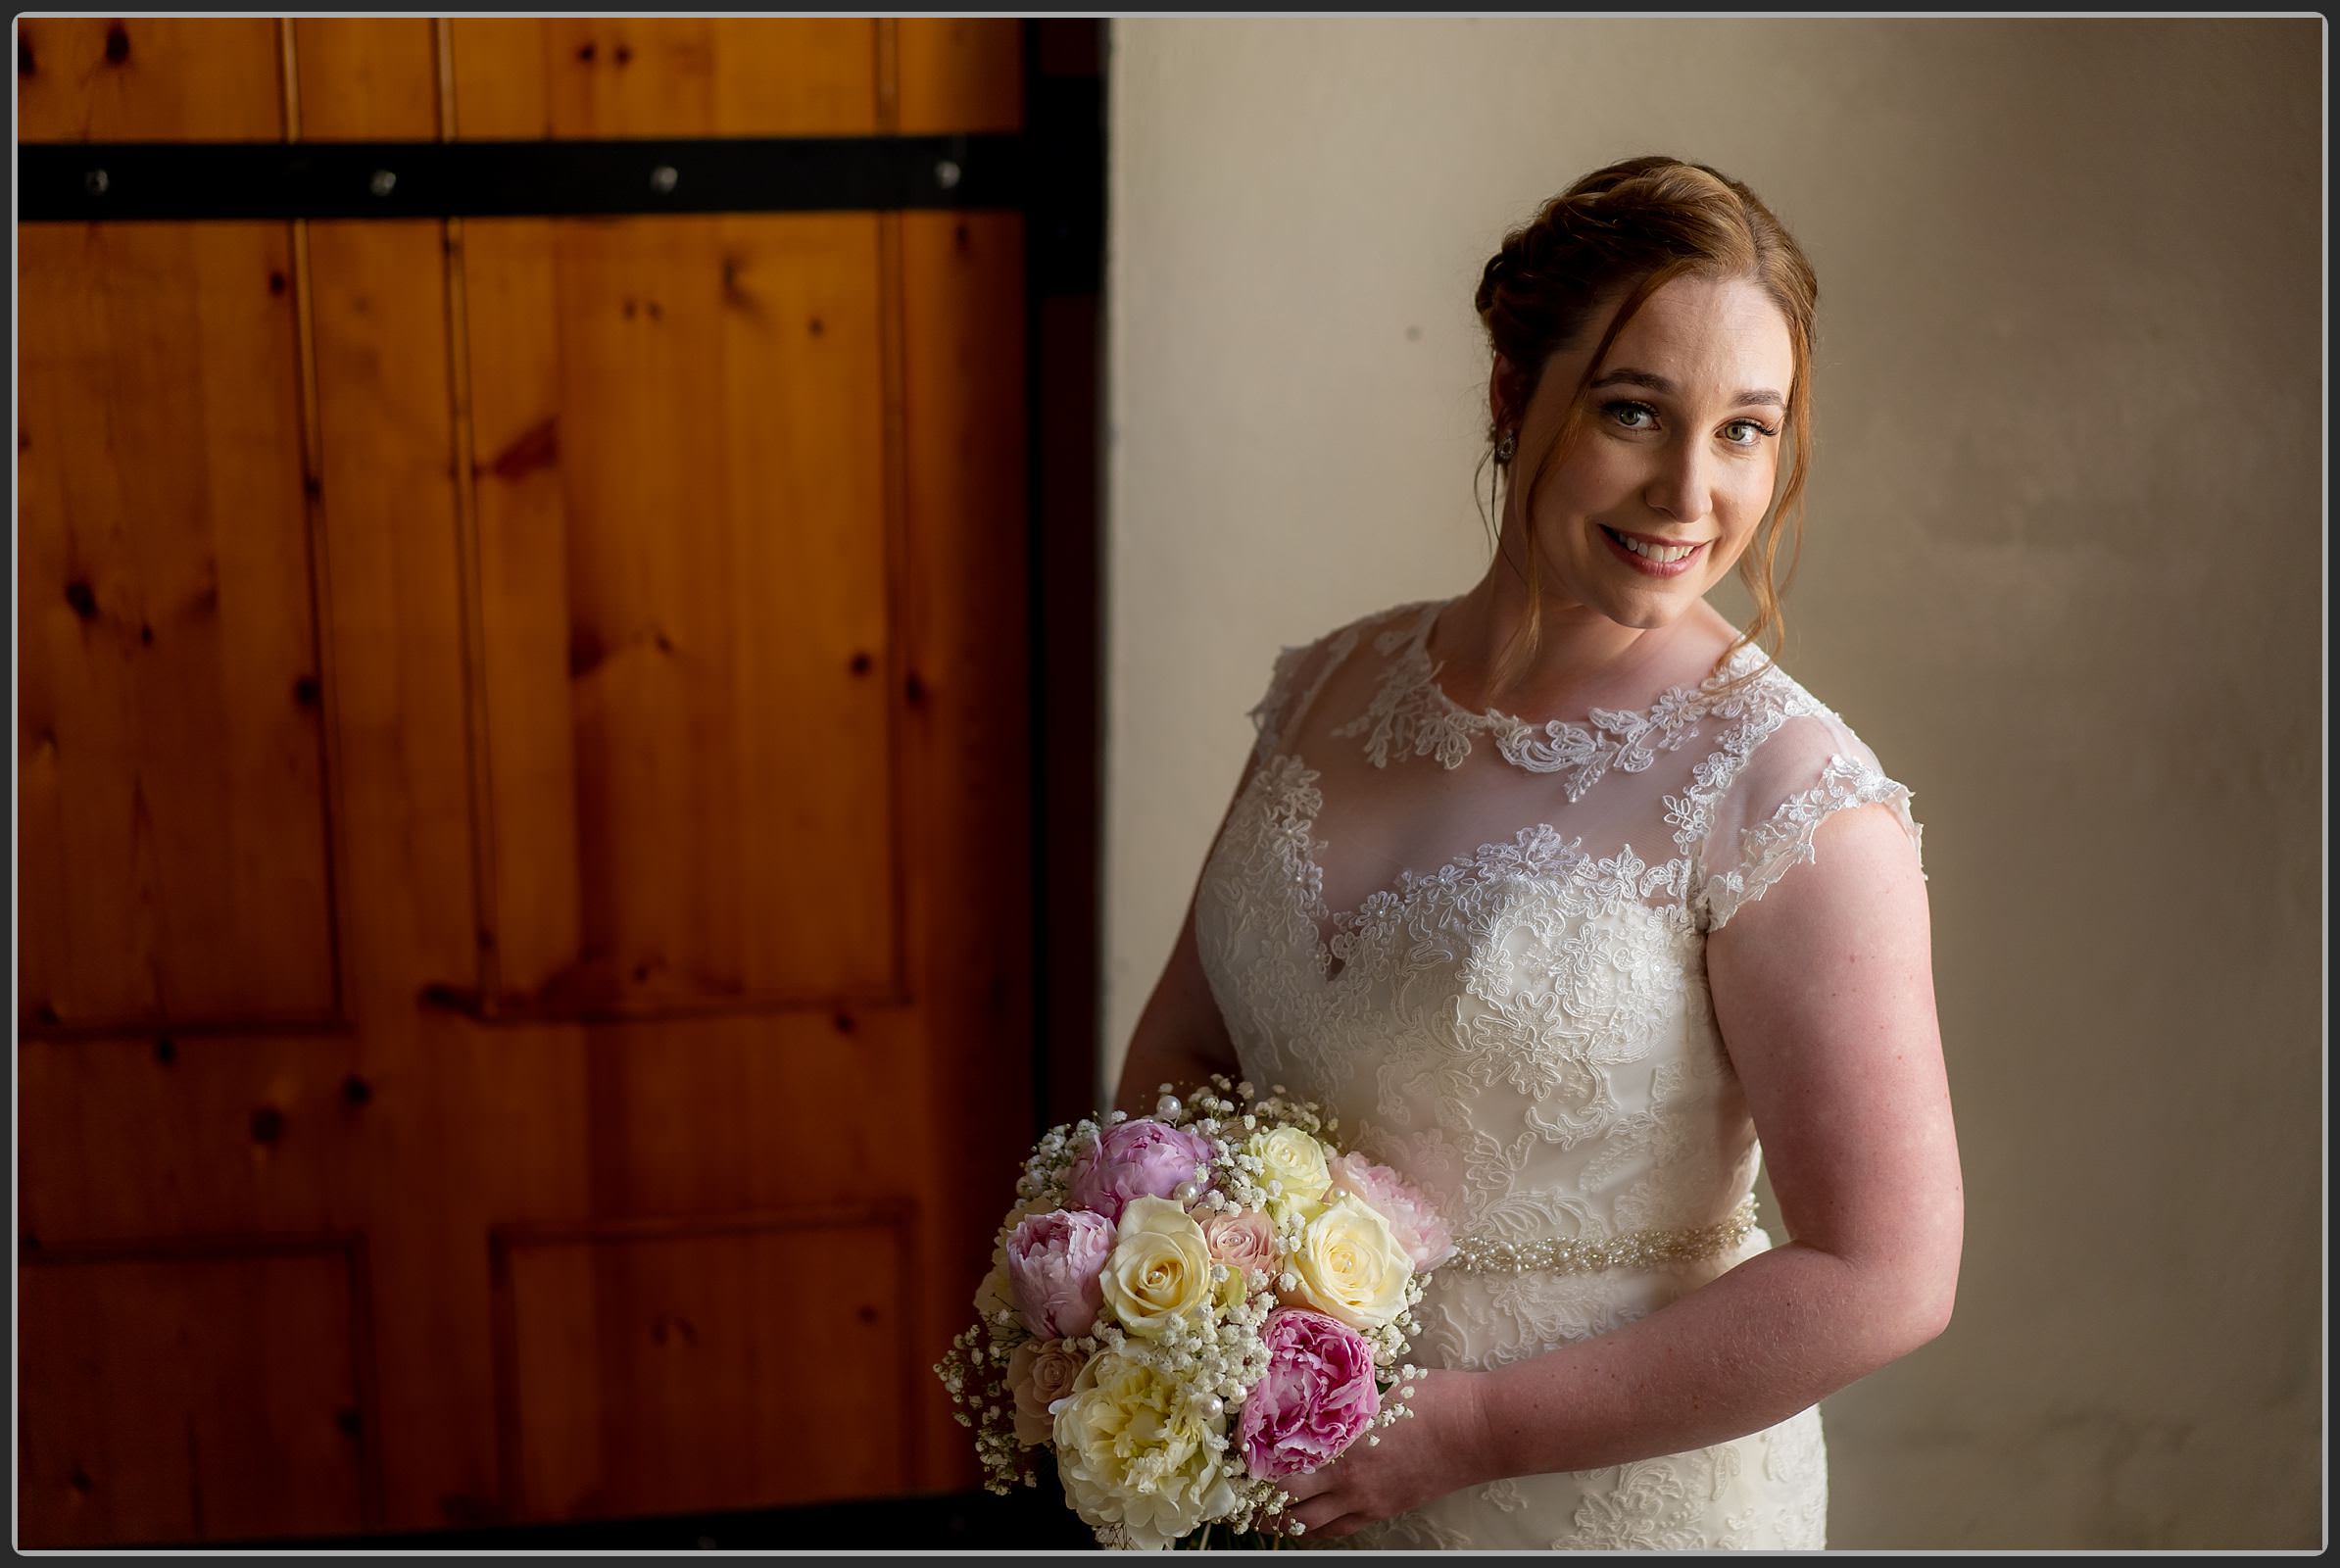 The bride at Polhawn Fort